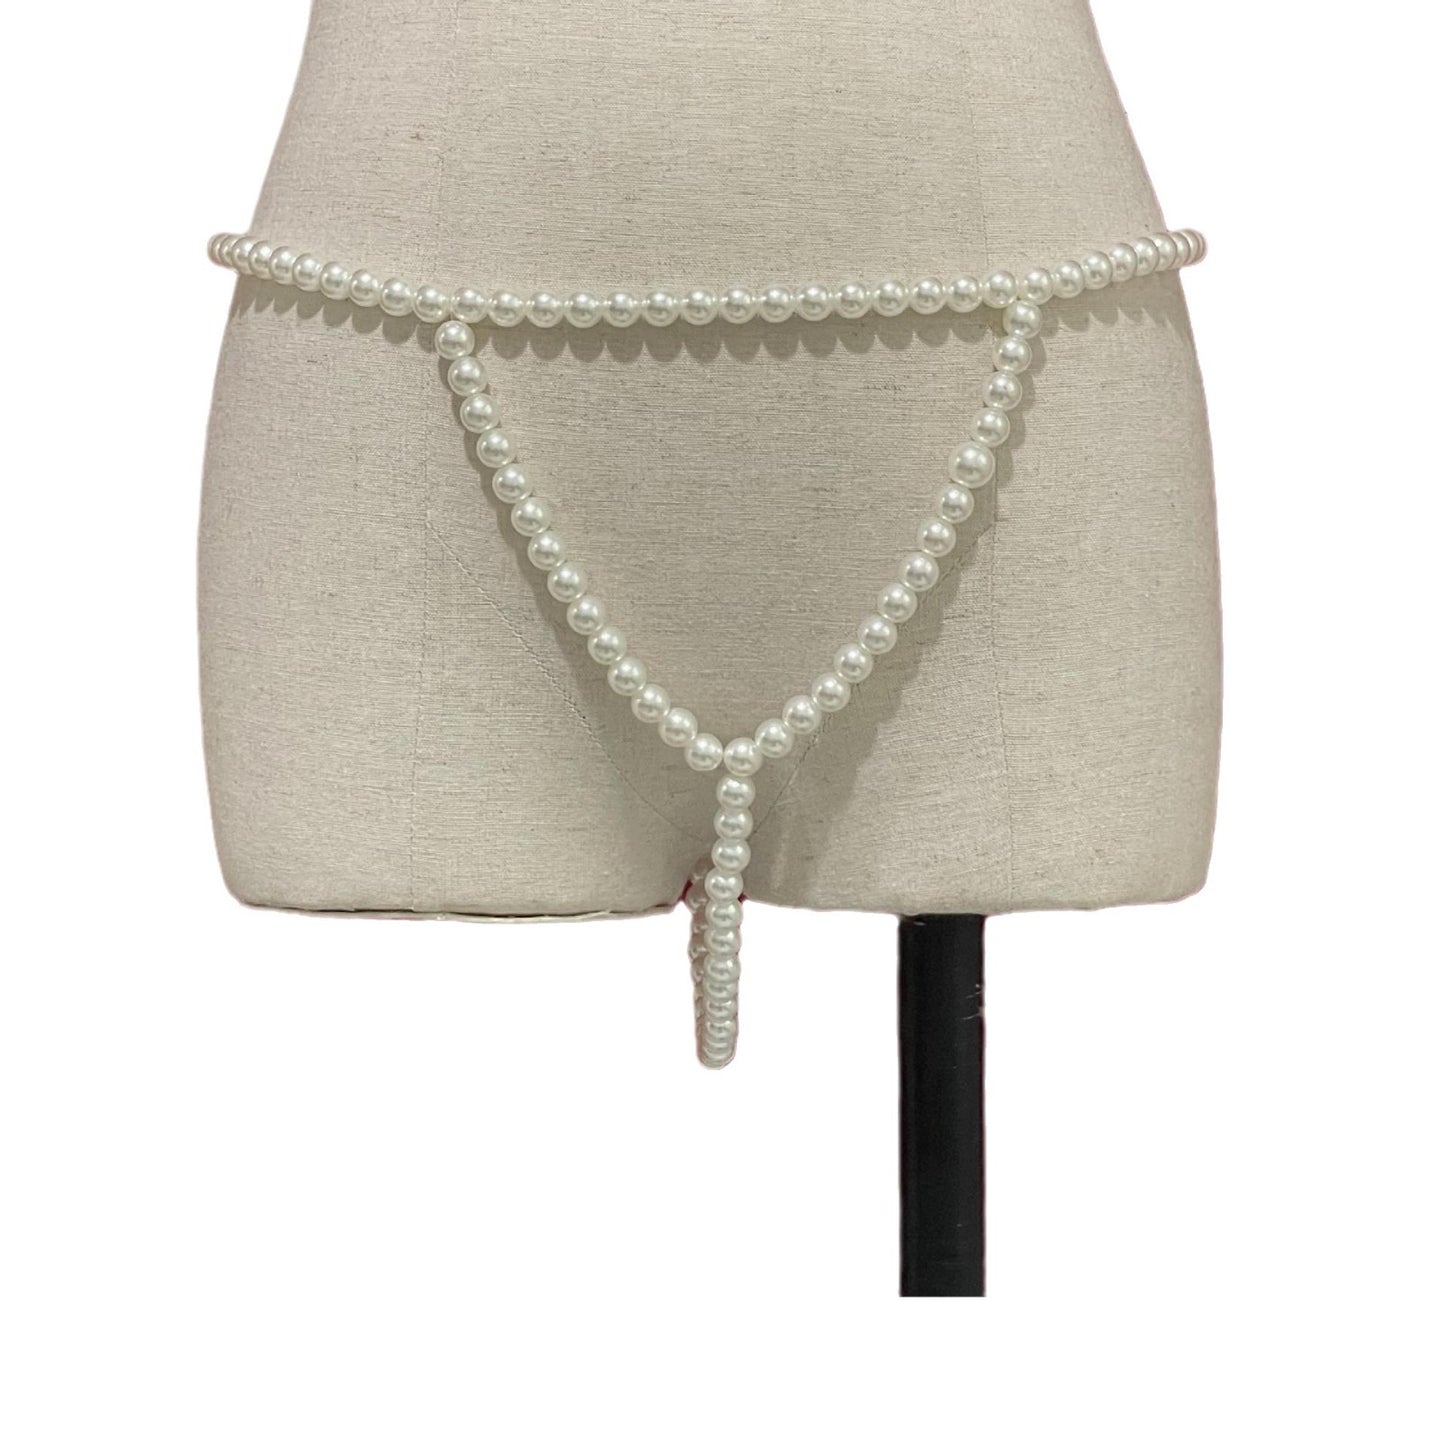 Original Simplicity Cross Pearl Body Cha Sexy Chest Necklace Stack Accessory Outerwear Suit Waist Chain Accessories Women